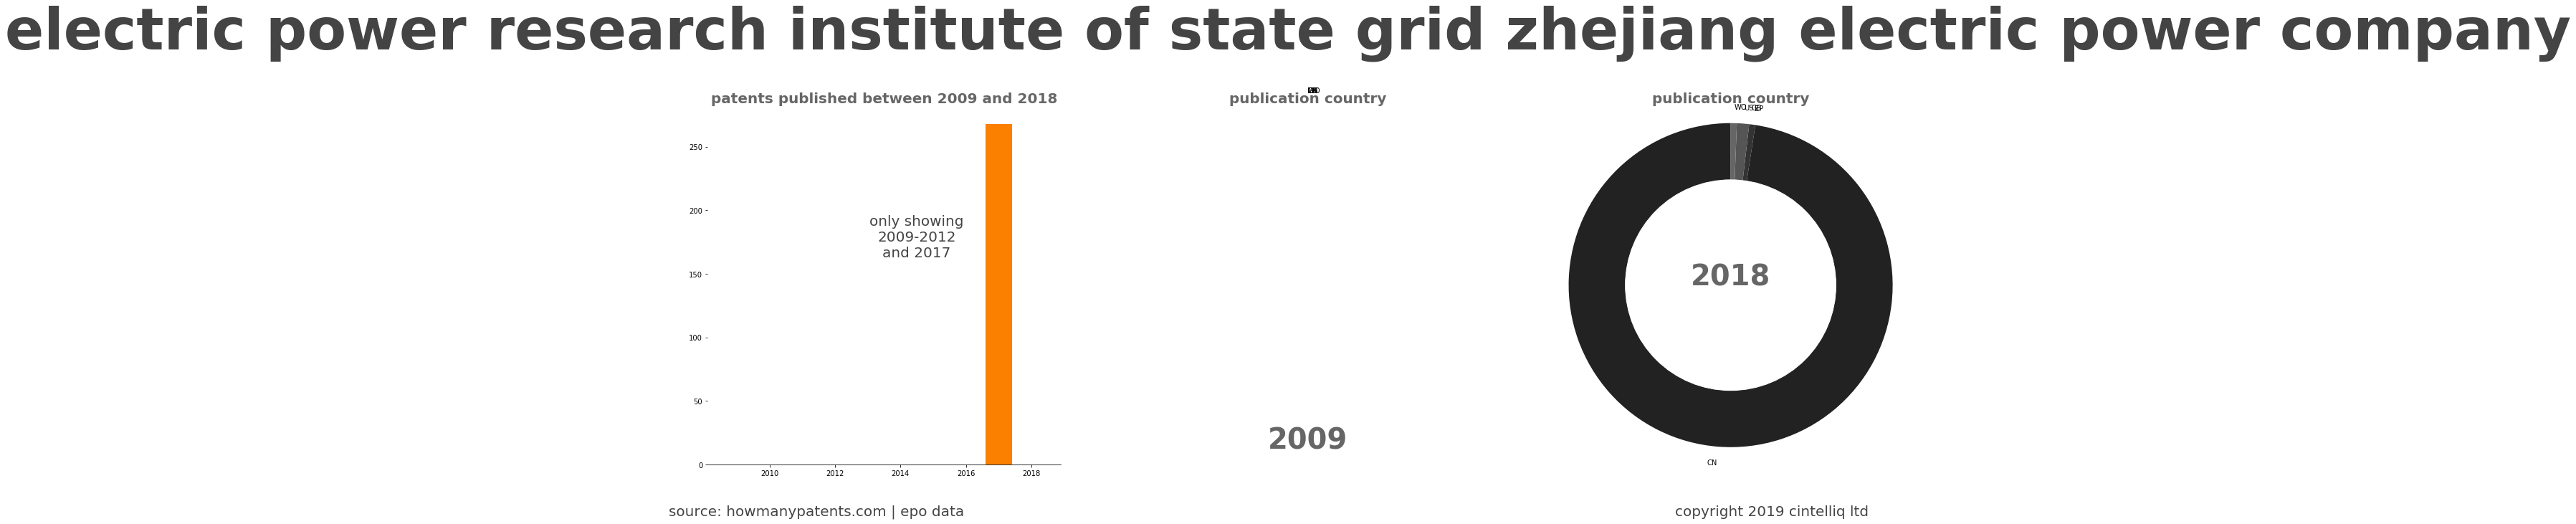 summary of patents for Electric Power Research Institute Of State Grid Zhejiang Electric Power Company